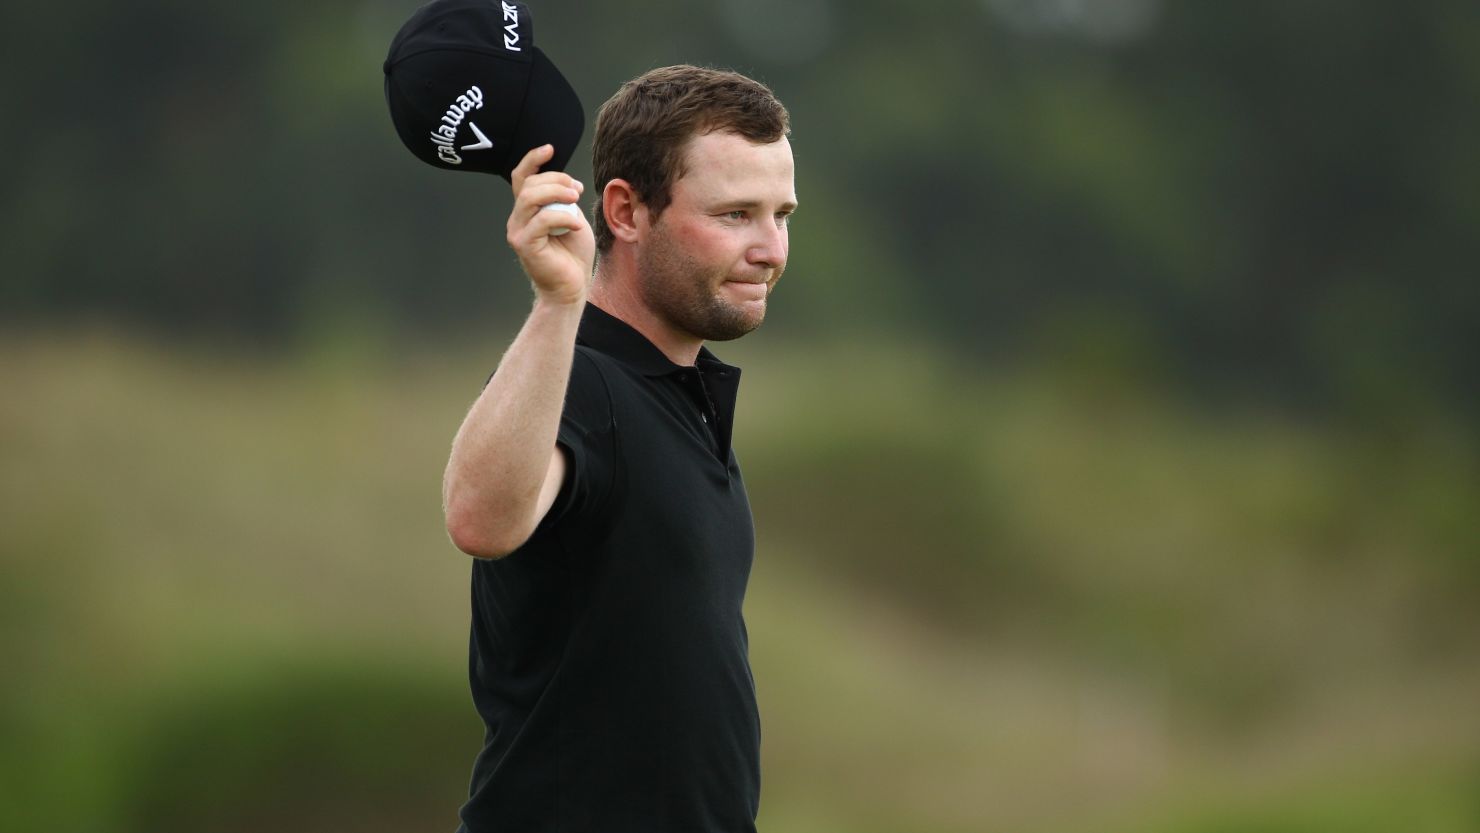 Branden Grace powered to the top of the leaderboard at the halfway stage of the Volvo Golf Champions tournament in South Africa.